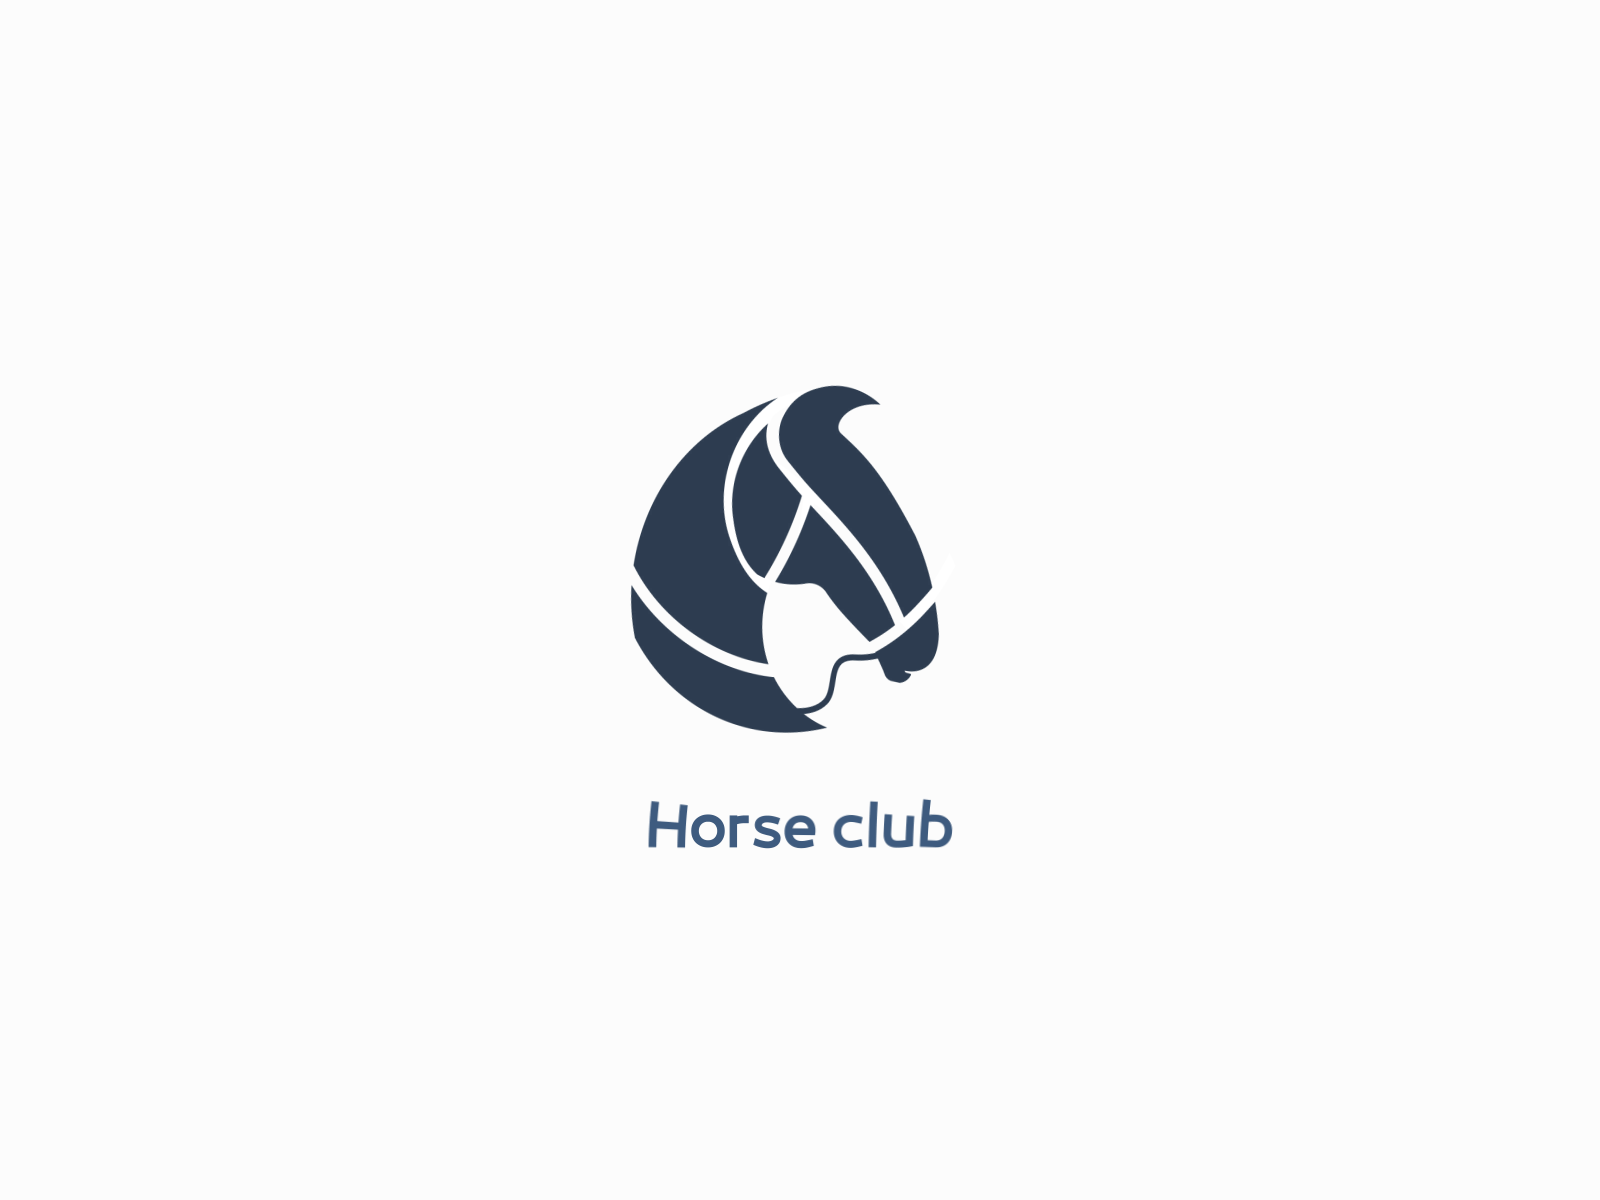 "Horse club" logo motion after effect aftereffects branding design graphic icon illustraion illustration logo morph motion vector